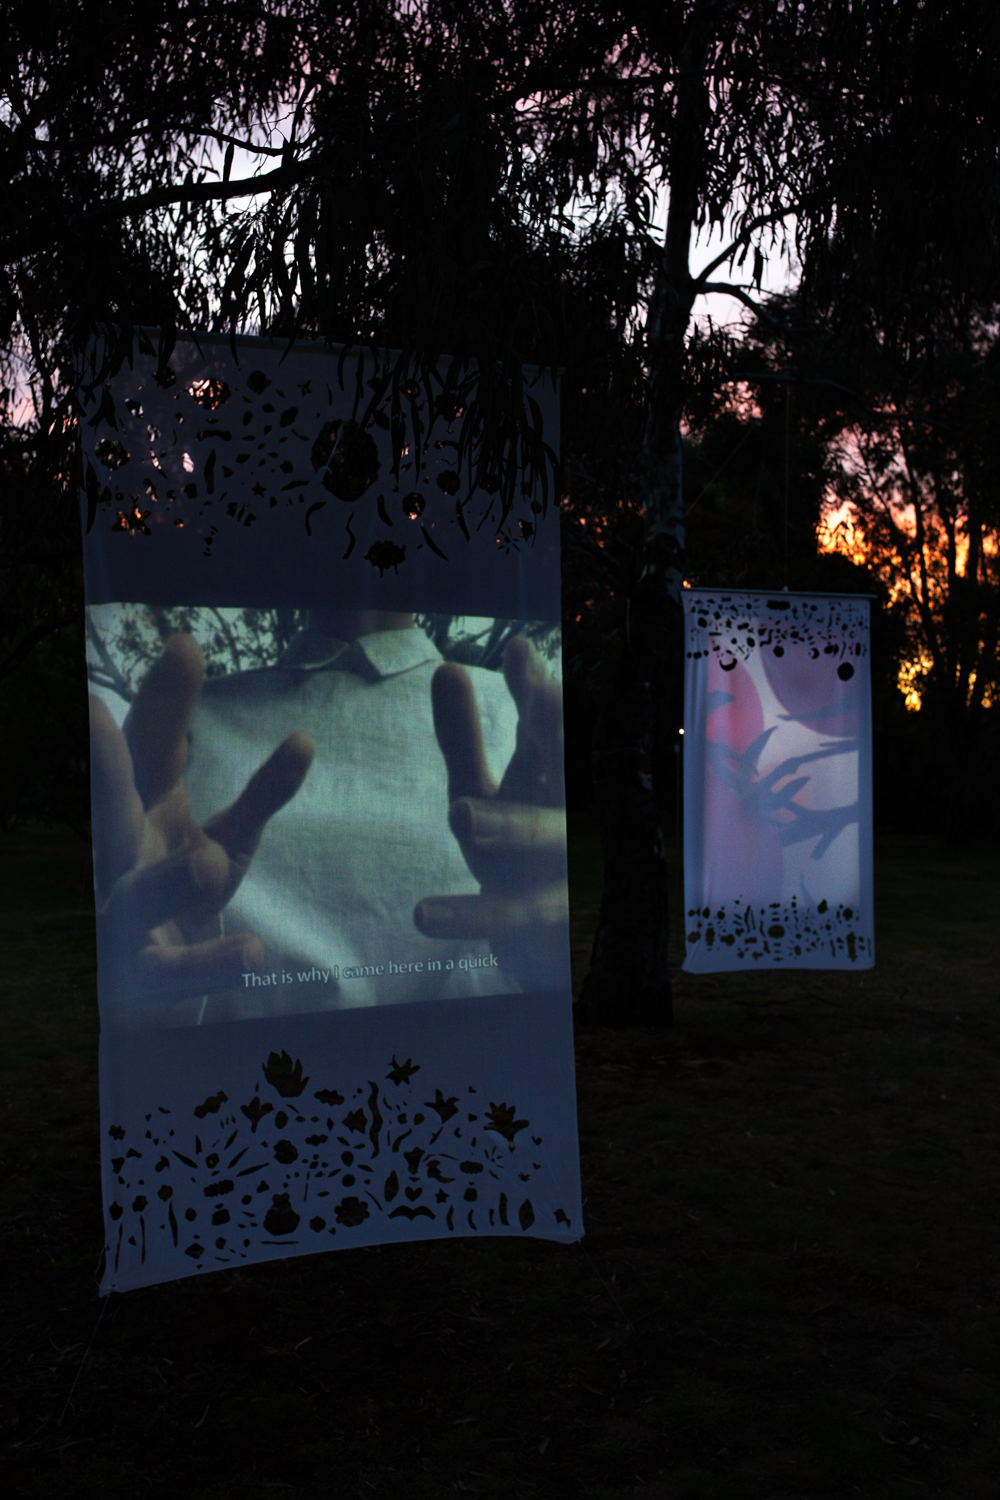 I Was Named to Dream for Others is a video installation consisting of two sculptural banners with projections, installed in the park at dusk.